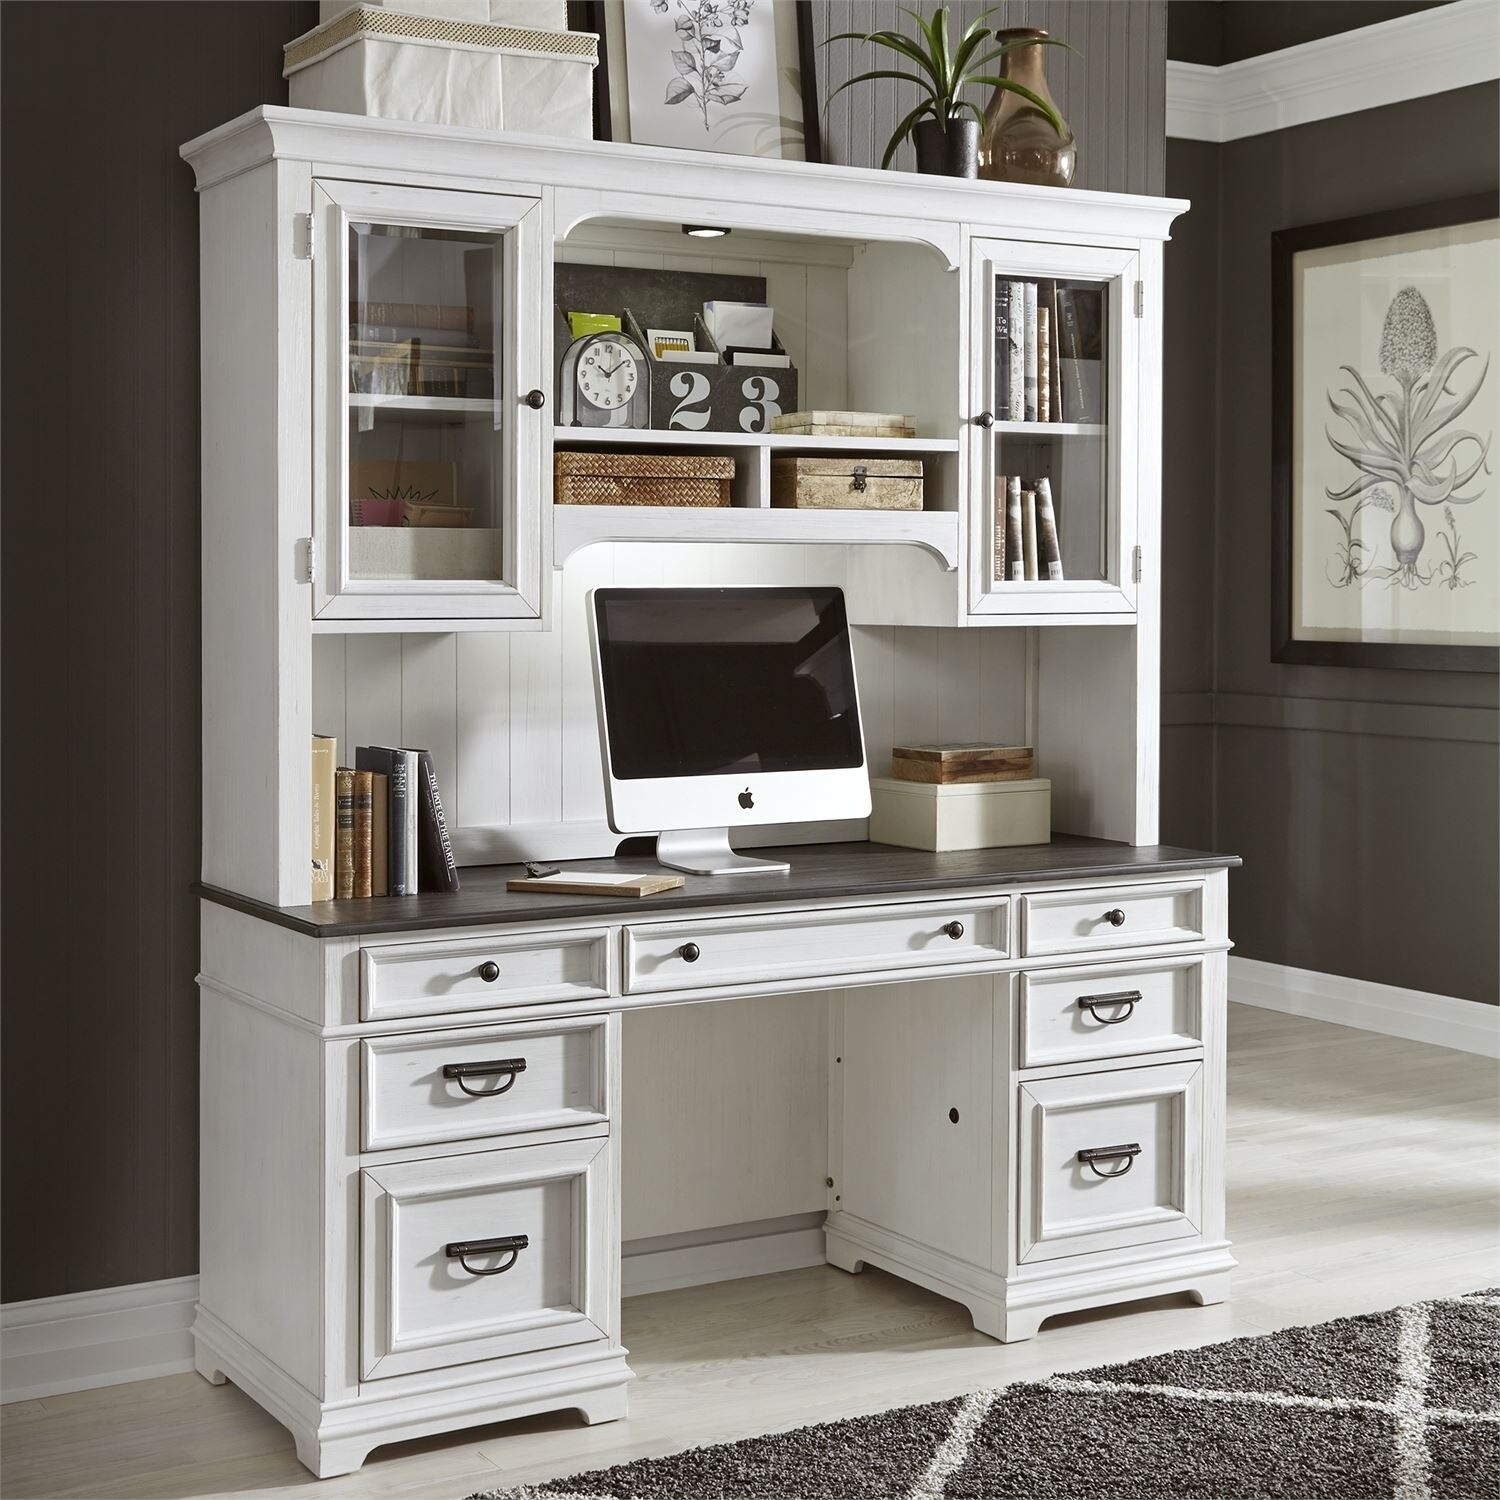 Shop Allyson Park Wirebrushed White Jr Executive Credenza And